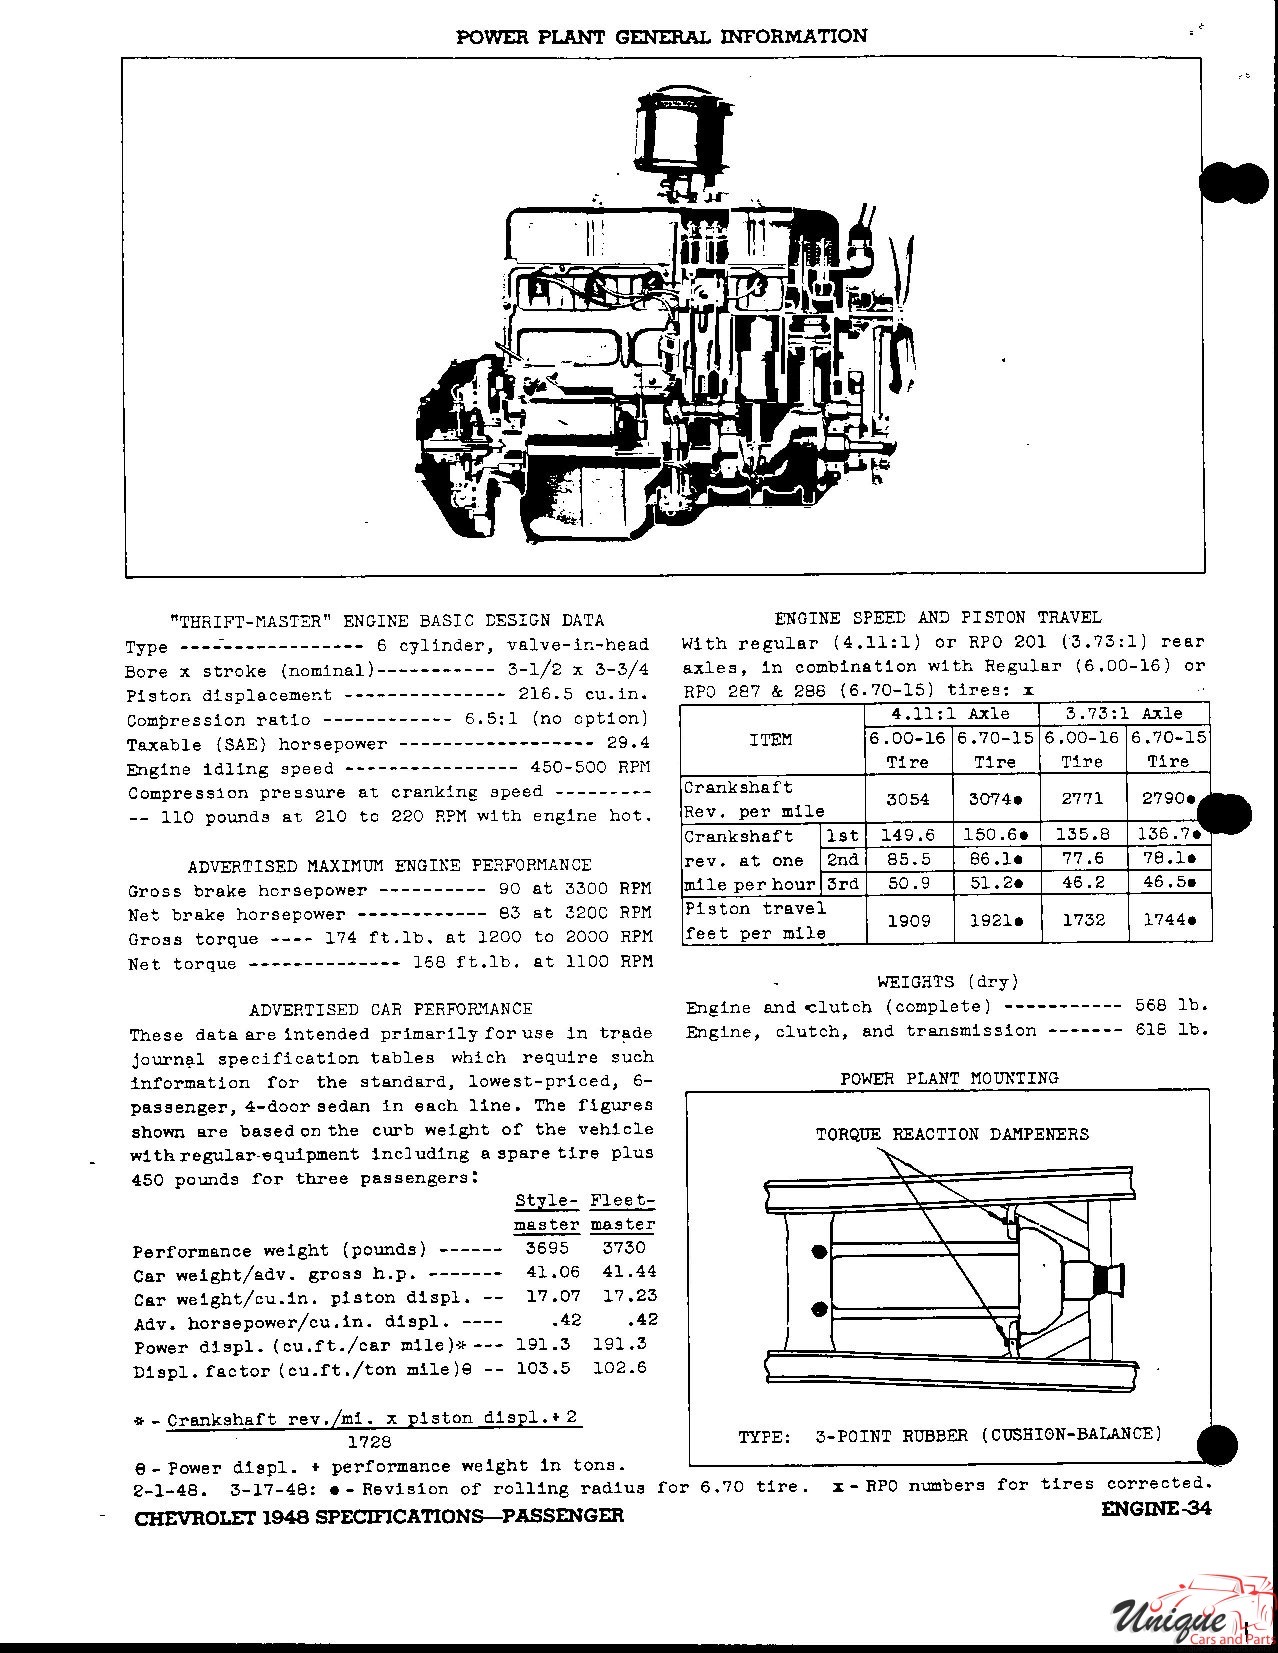 1948 Chevrolet Specifications Page 15